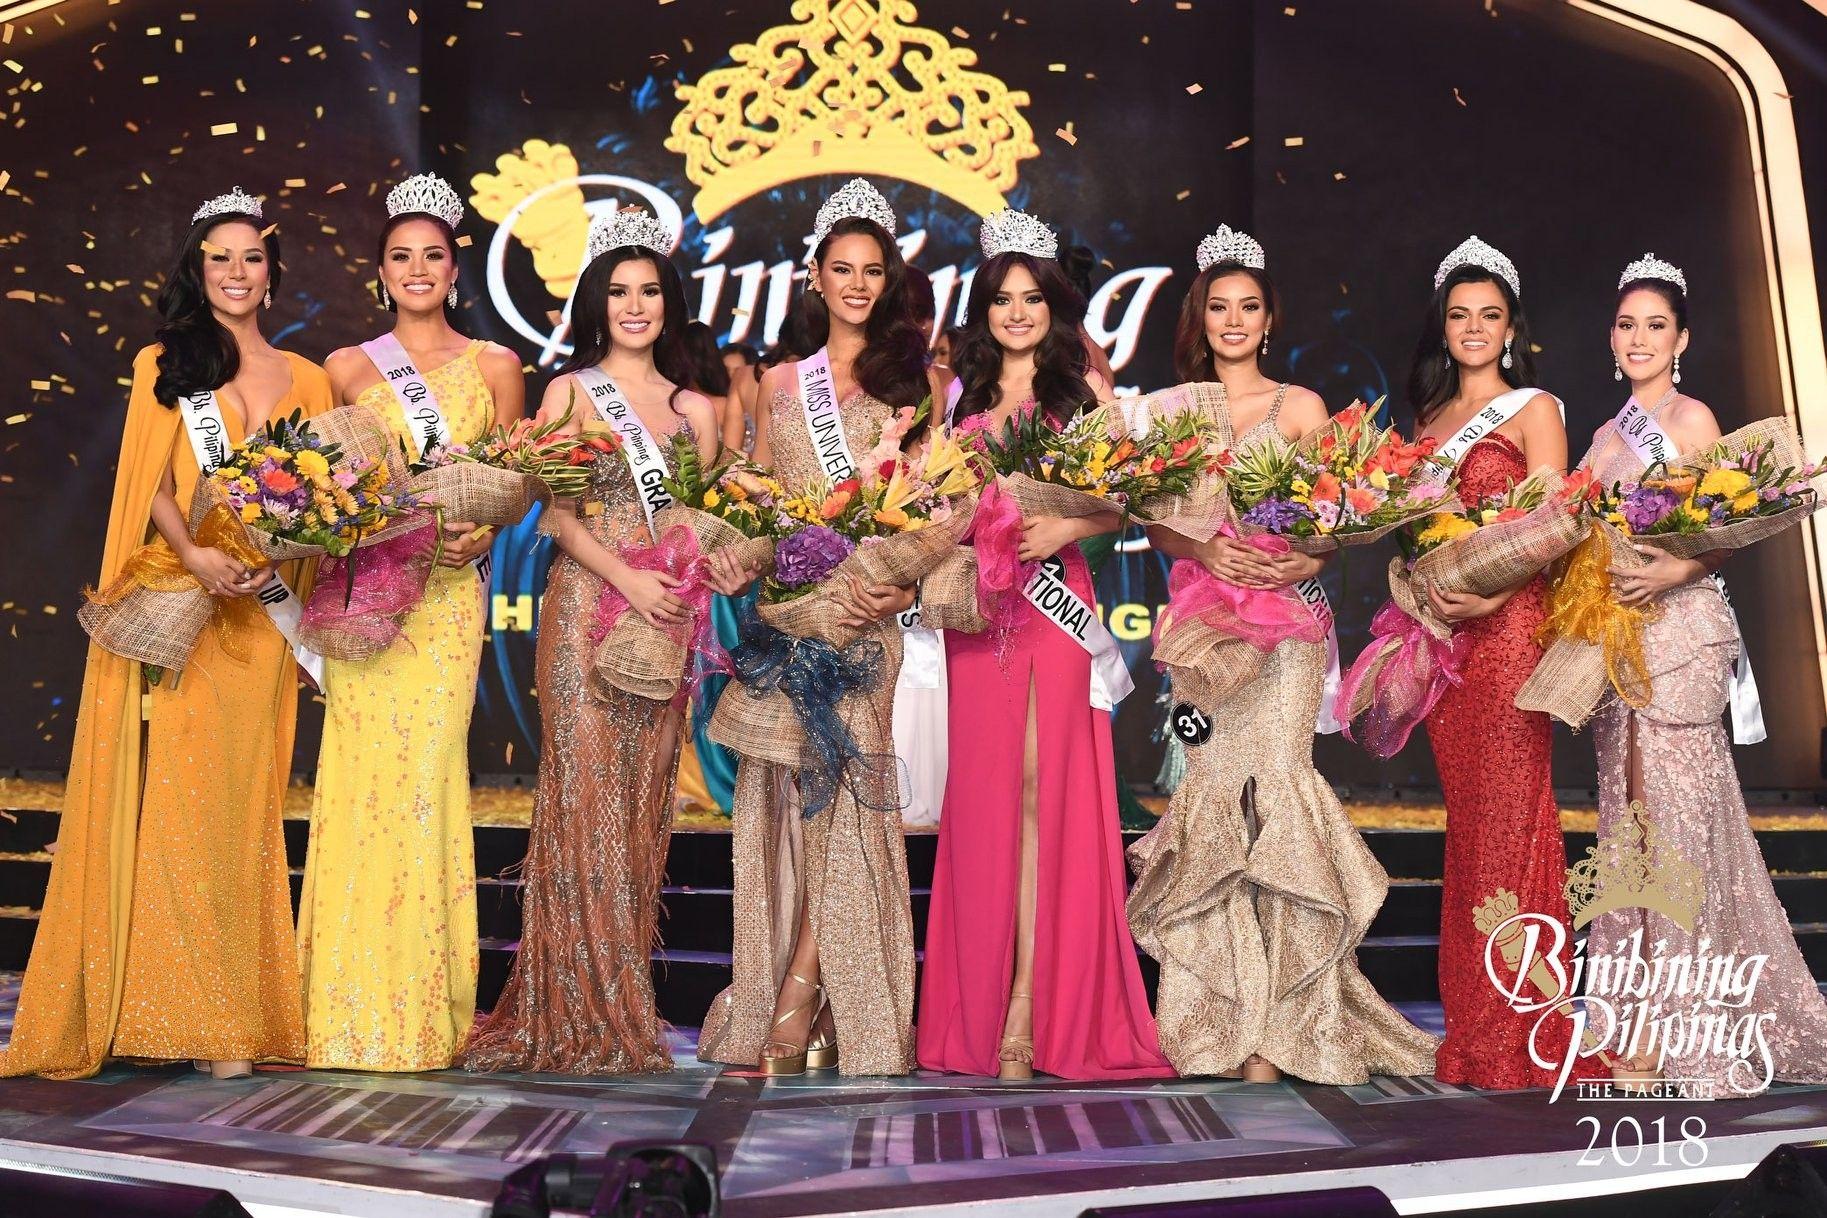 Catriona Gray is this year's Binibining Pilipinas, to Represent